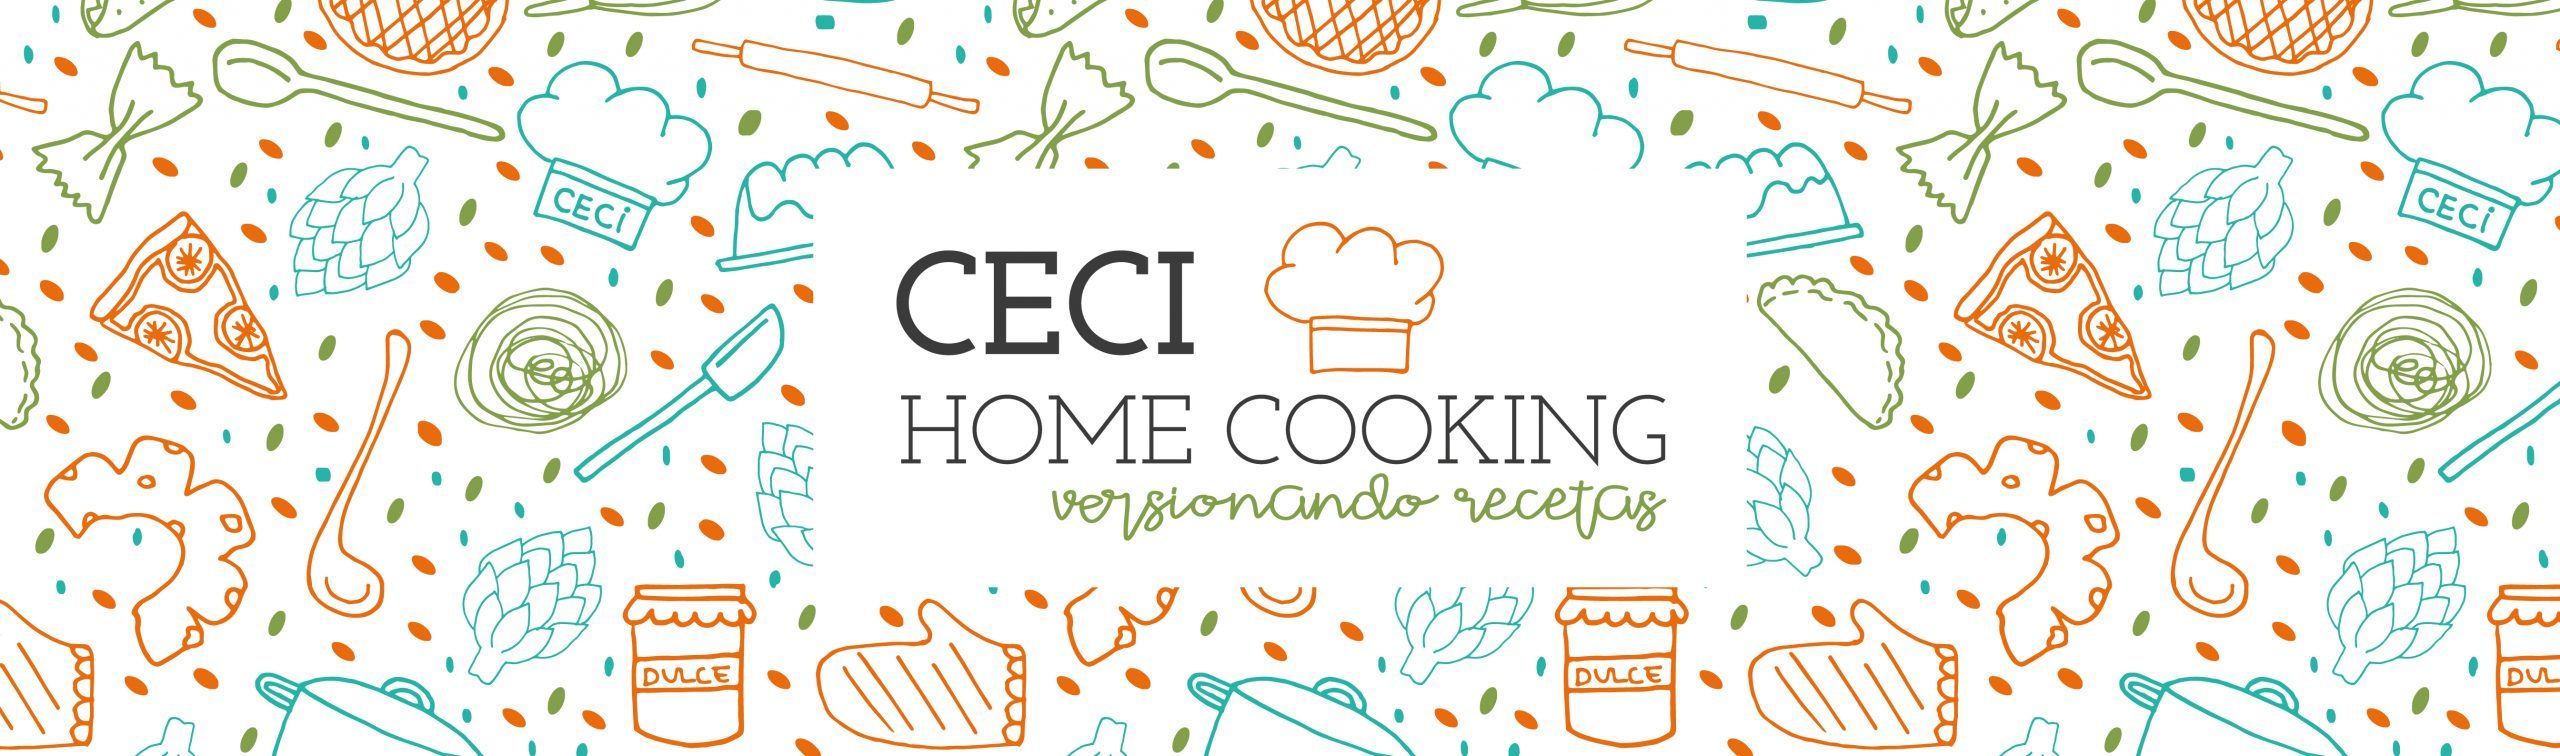 Ceci Home Cooking